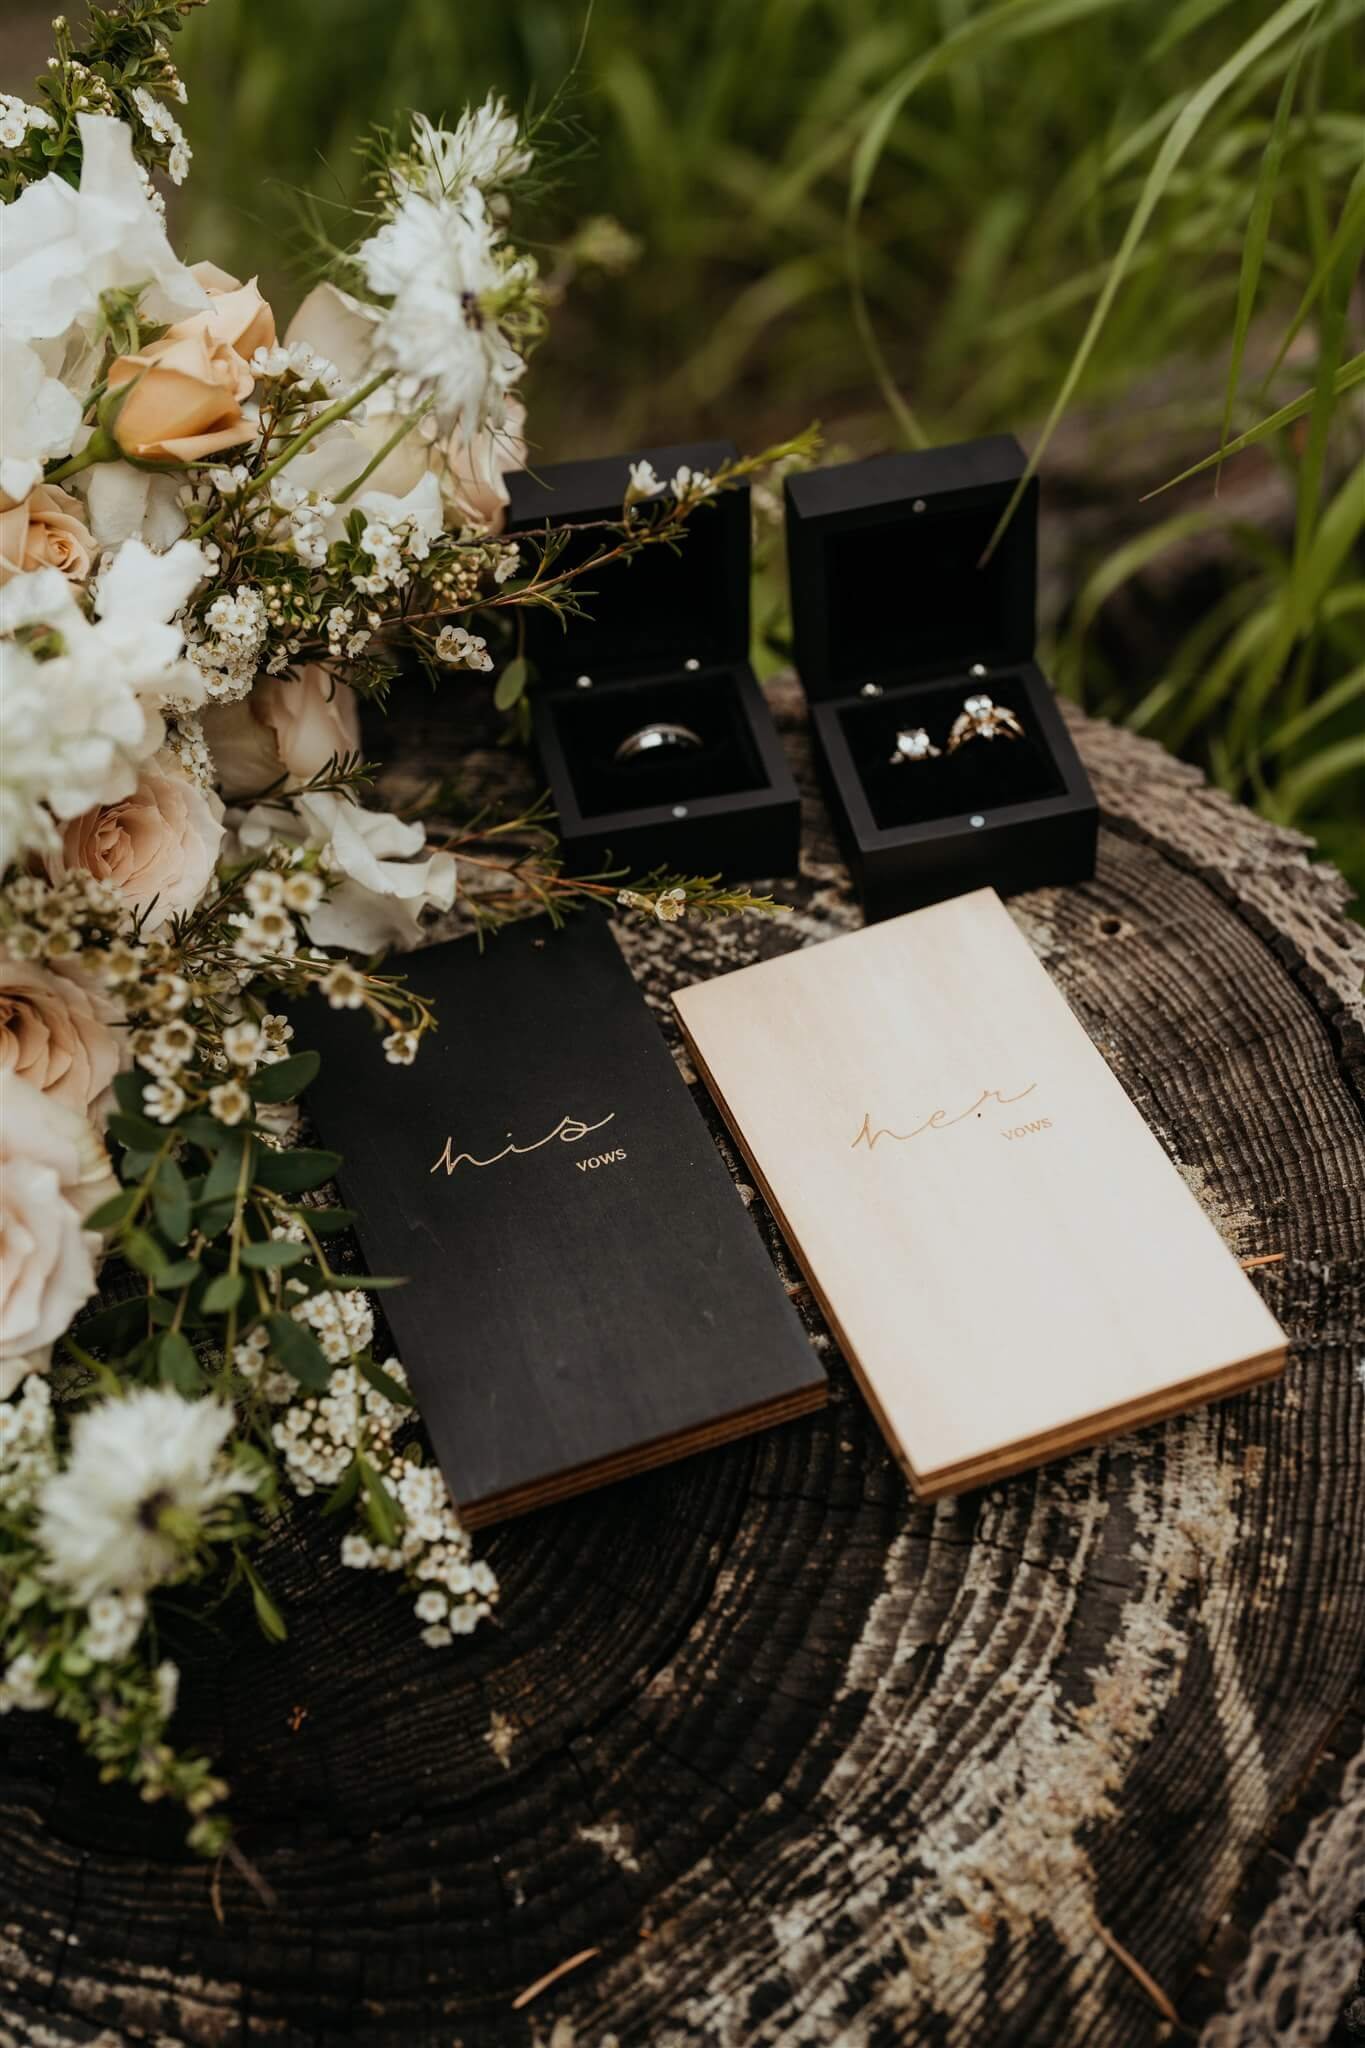 Black, cream, and white wedding details and vow books